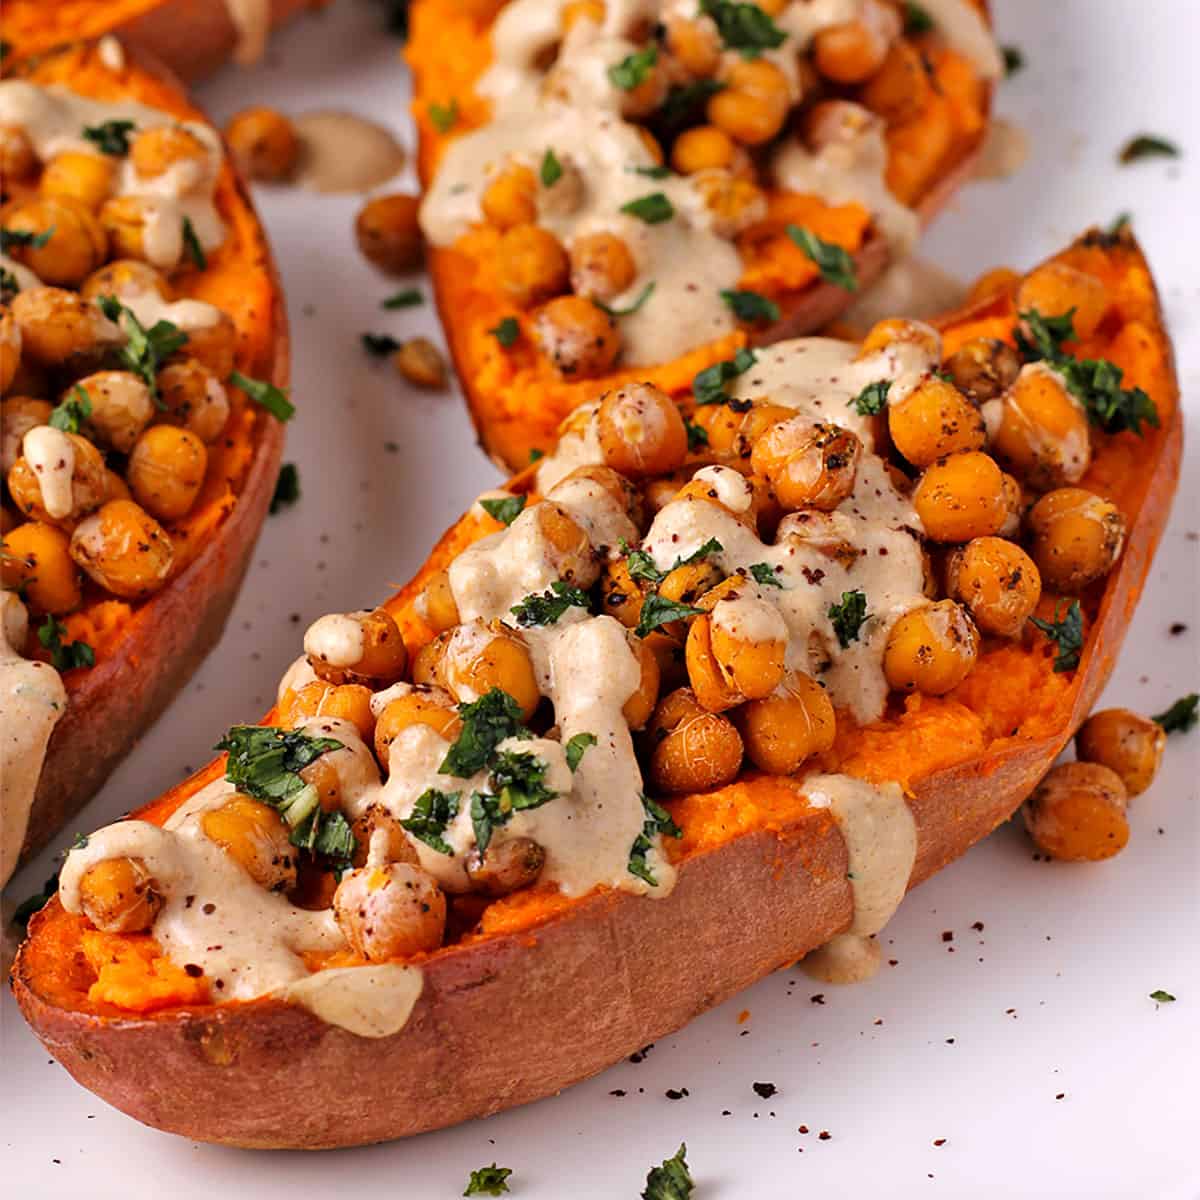 Baked sweet potato halves with chickpeas, dressing and chopped mint on top